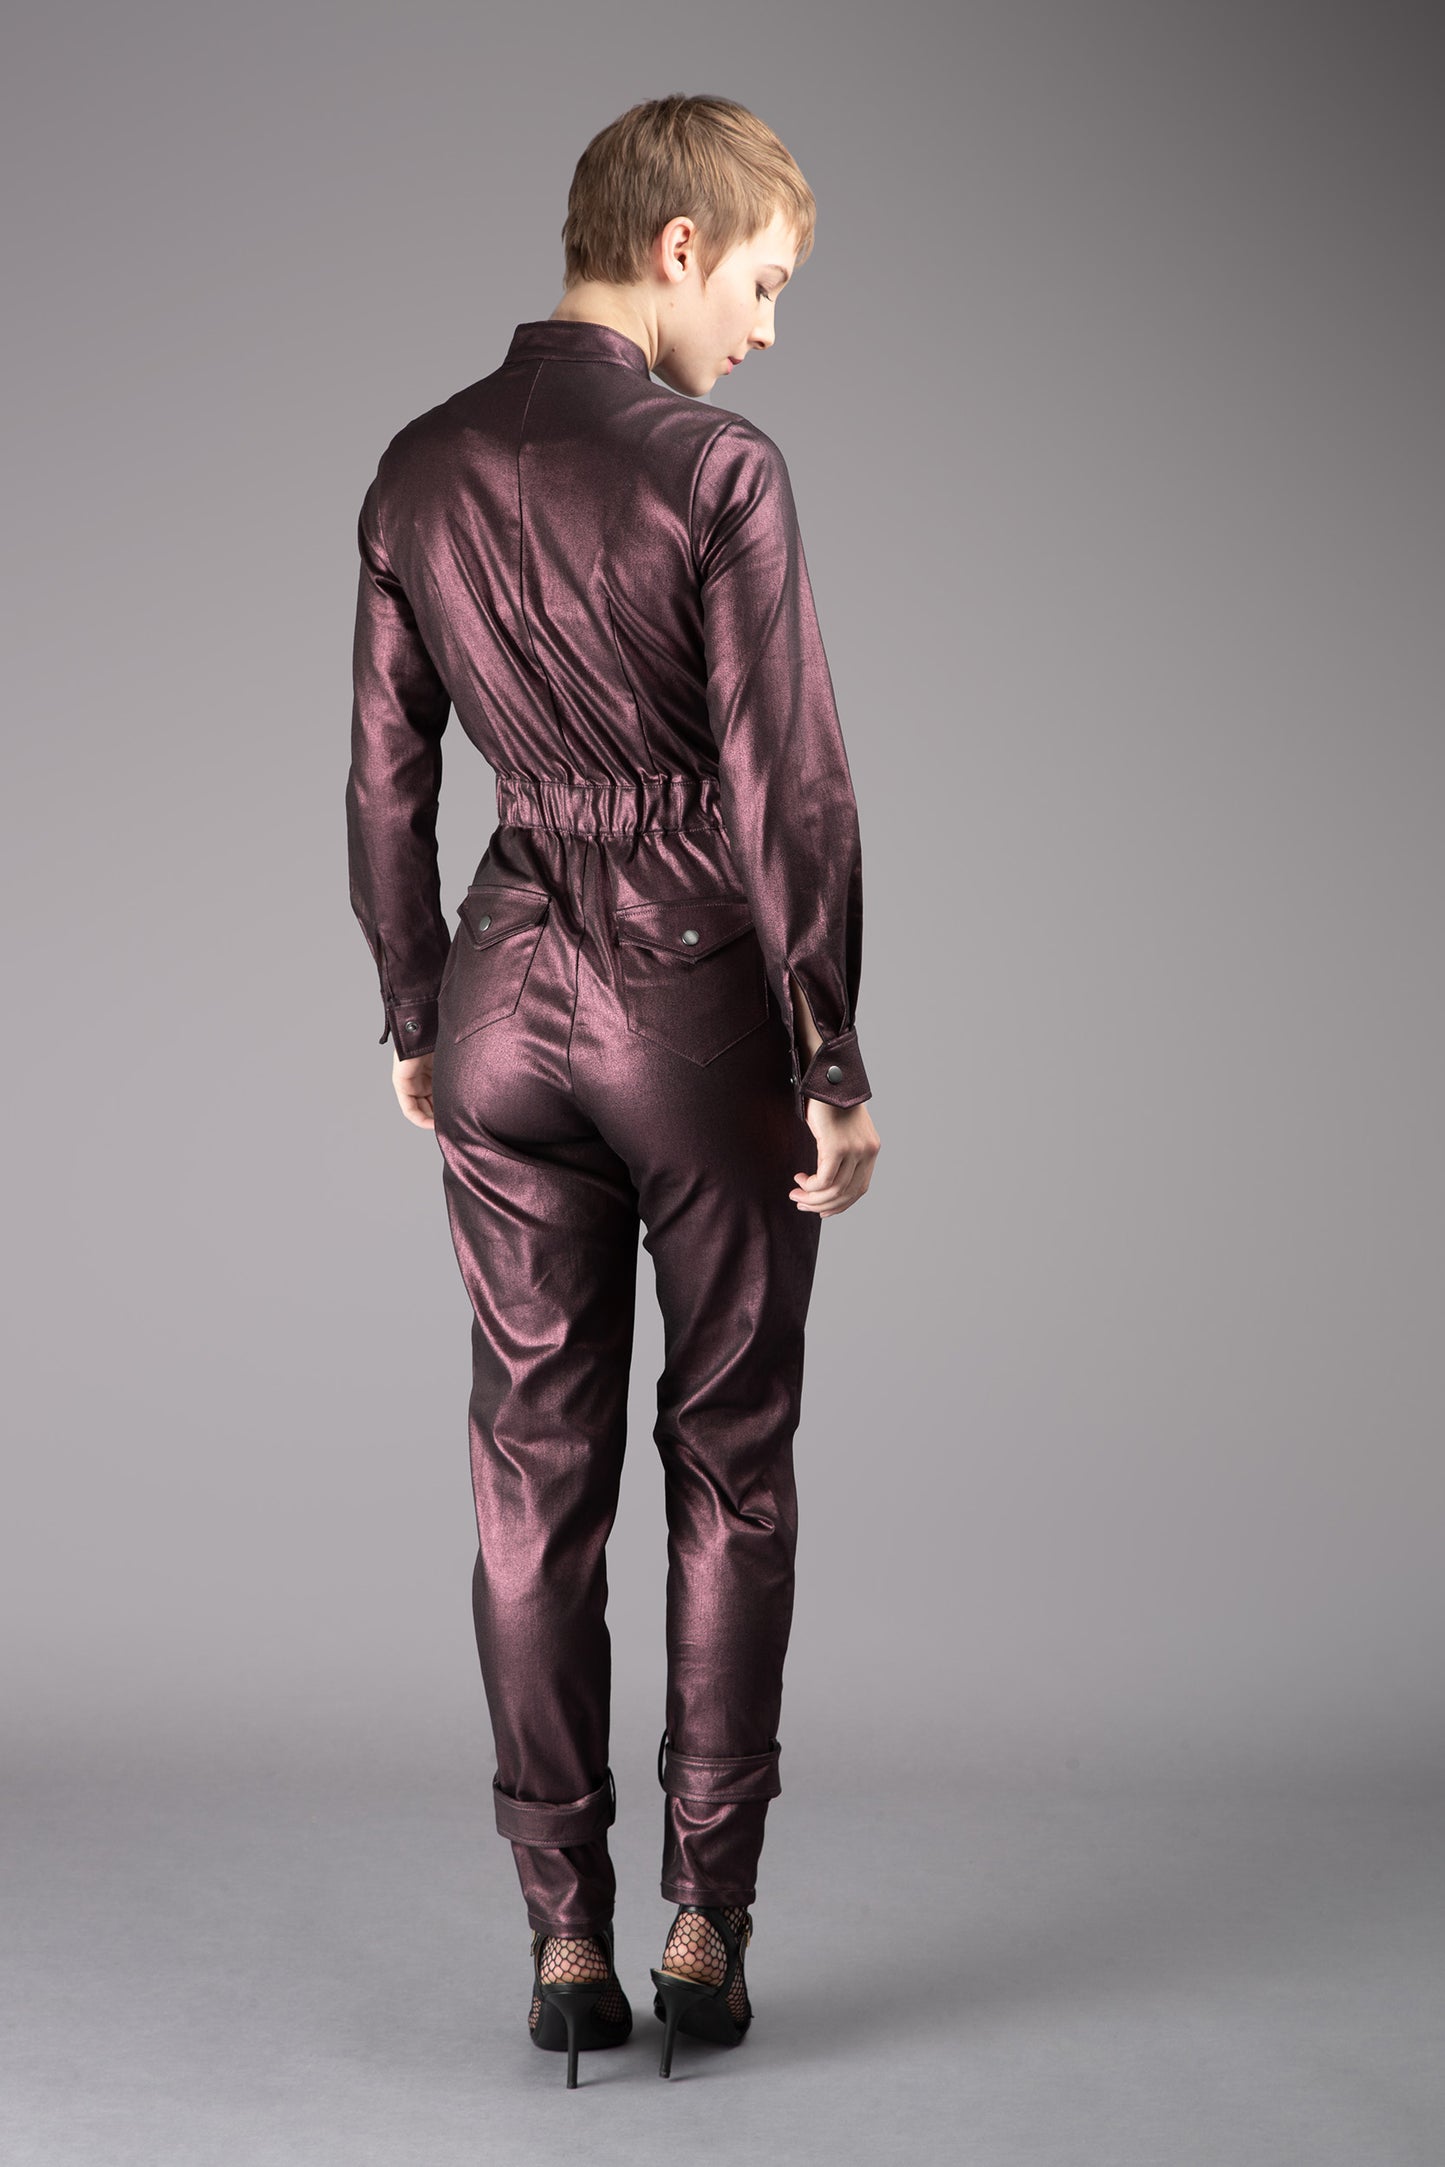 THE QUIMBY Jumpsuit - Long Sleeve in Plum Metallic Coated Stretch Cotton